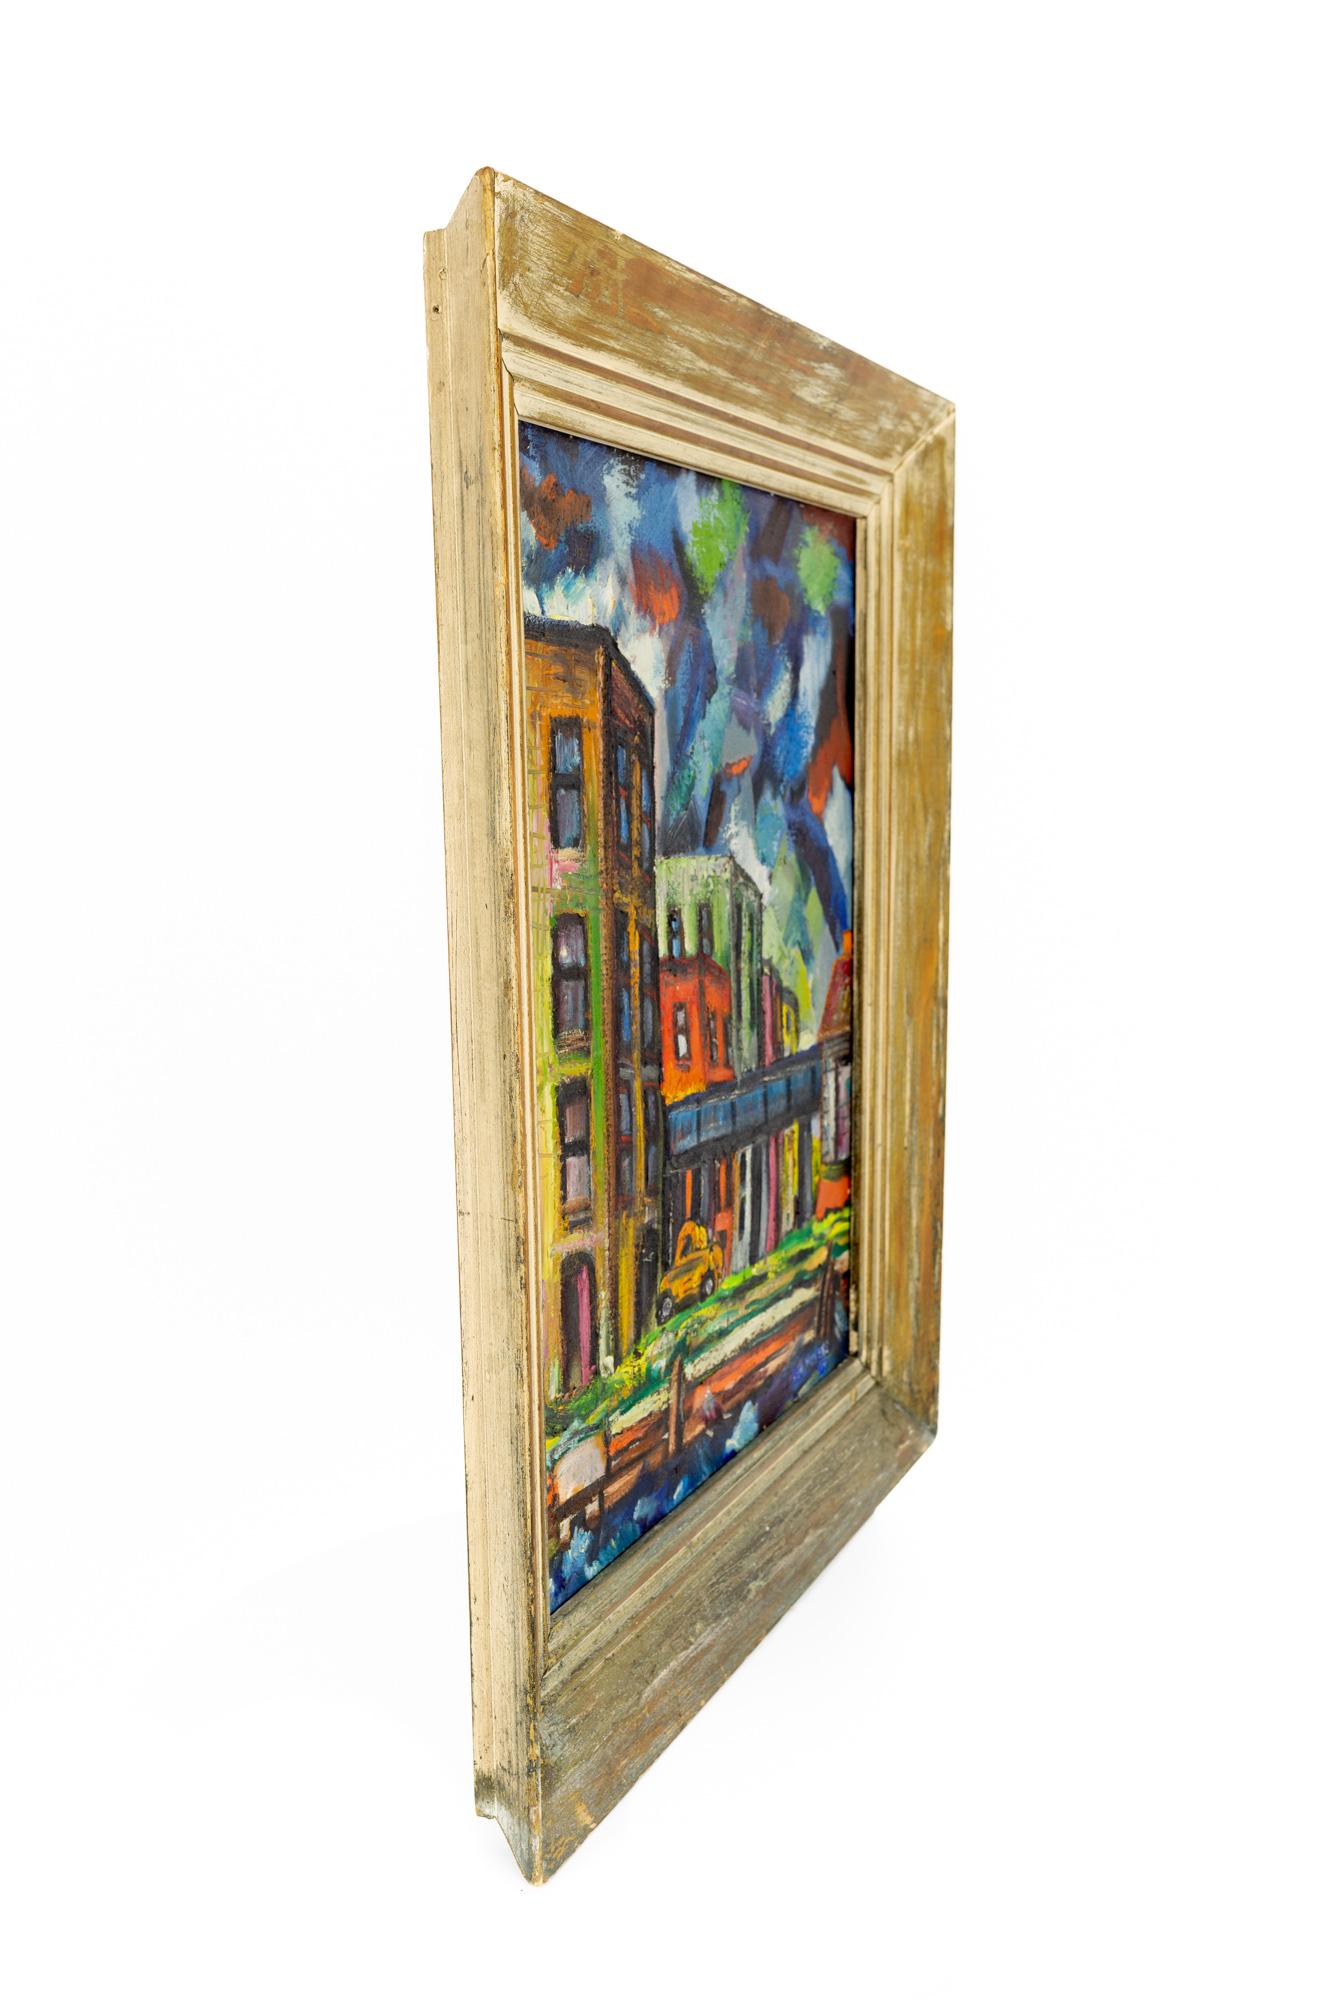 Ben Meyers signed framed mid-century cityscape painting

This piece measures: 26 wide x 3 deep x 30 inches high

Excellent Vintage condition

We take our photos in a controlled lighting studio to show as much detail as possible. We do not